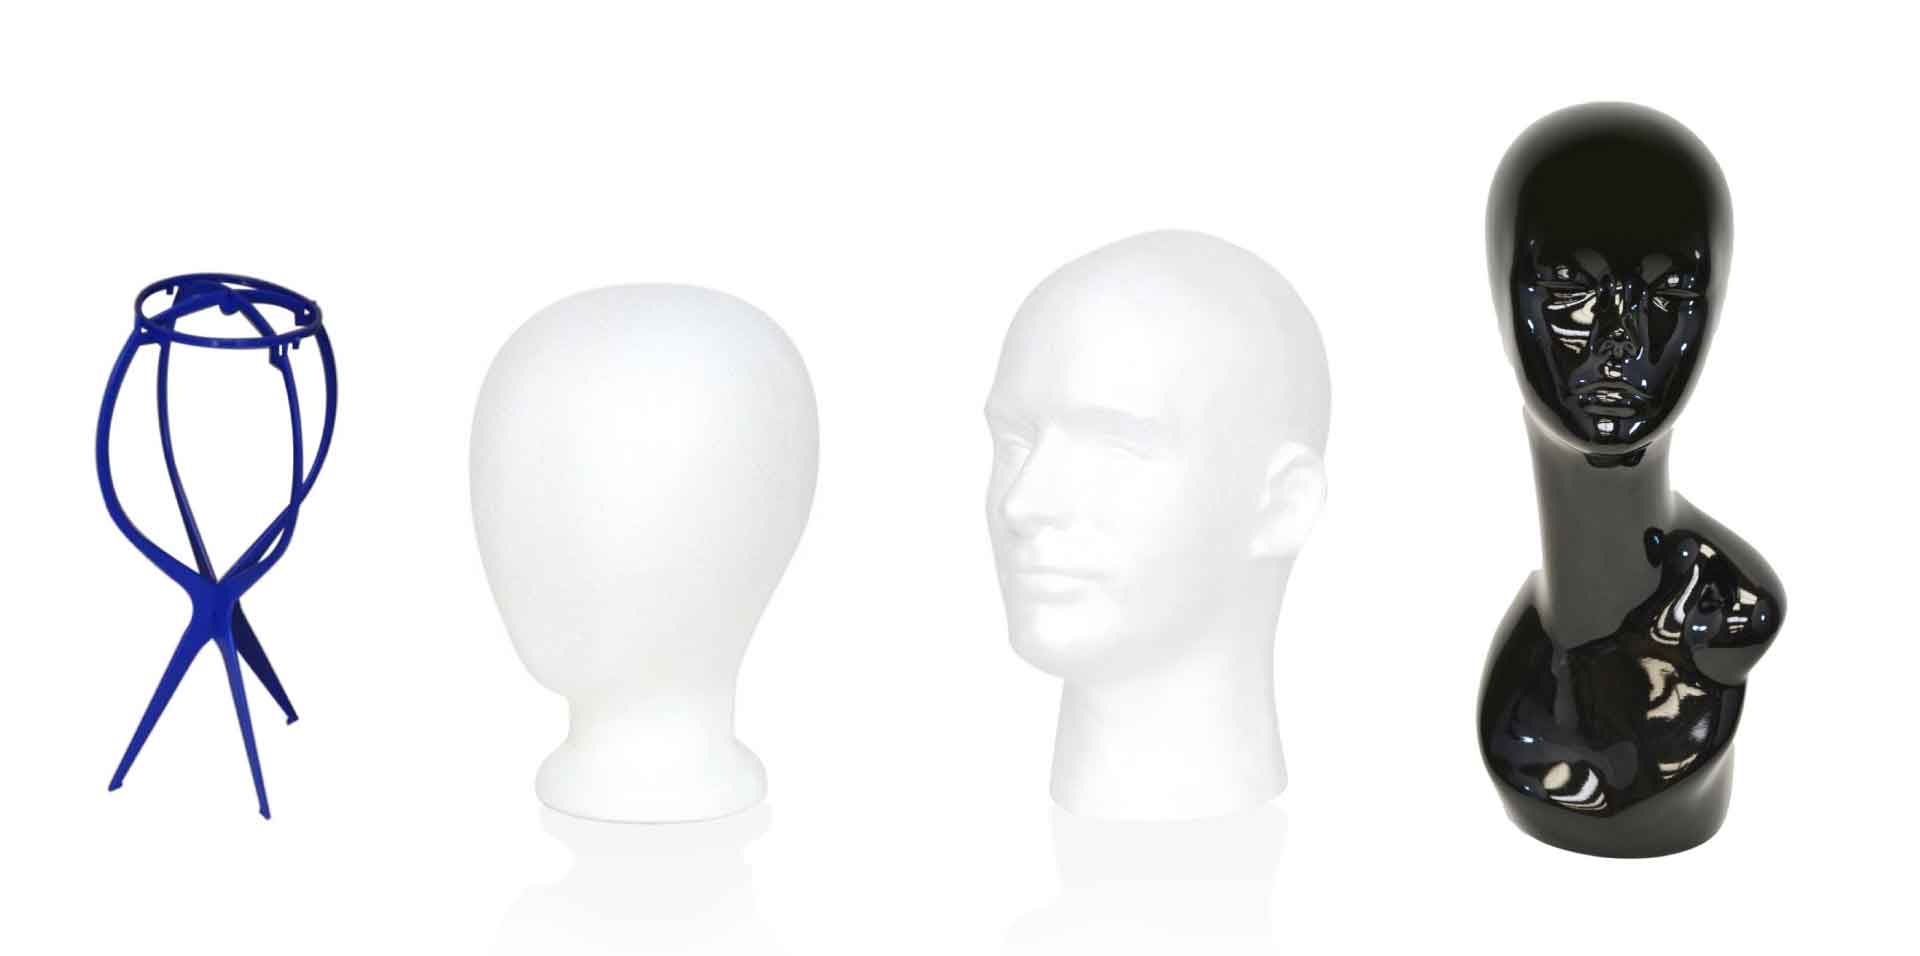 Hairpiece Stands or Mannequin Heads